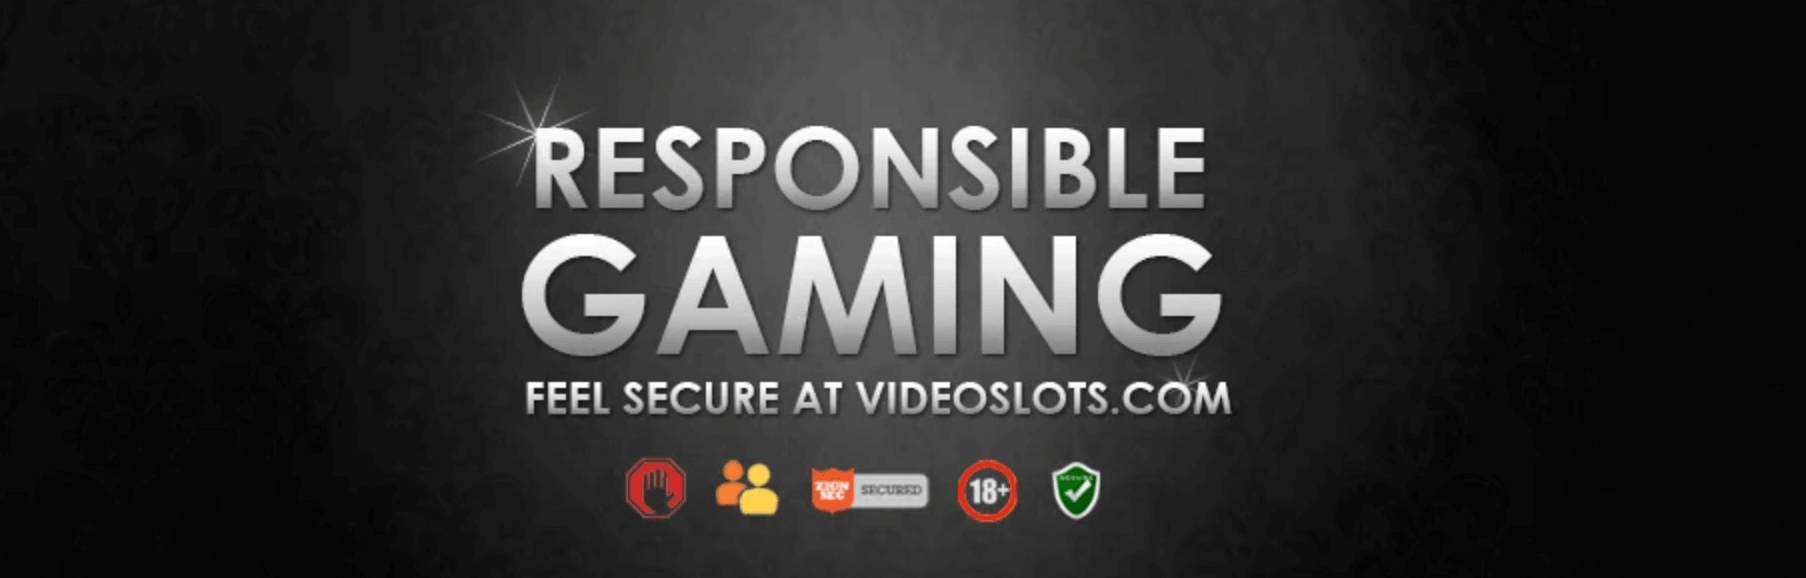 Responsible Gaming in the UK with VideoSlots